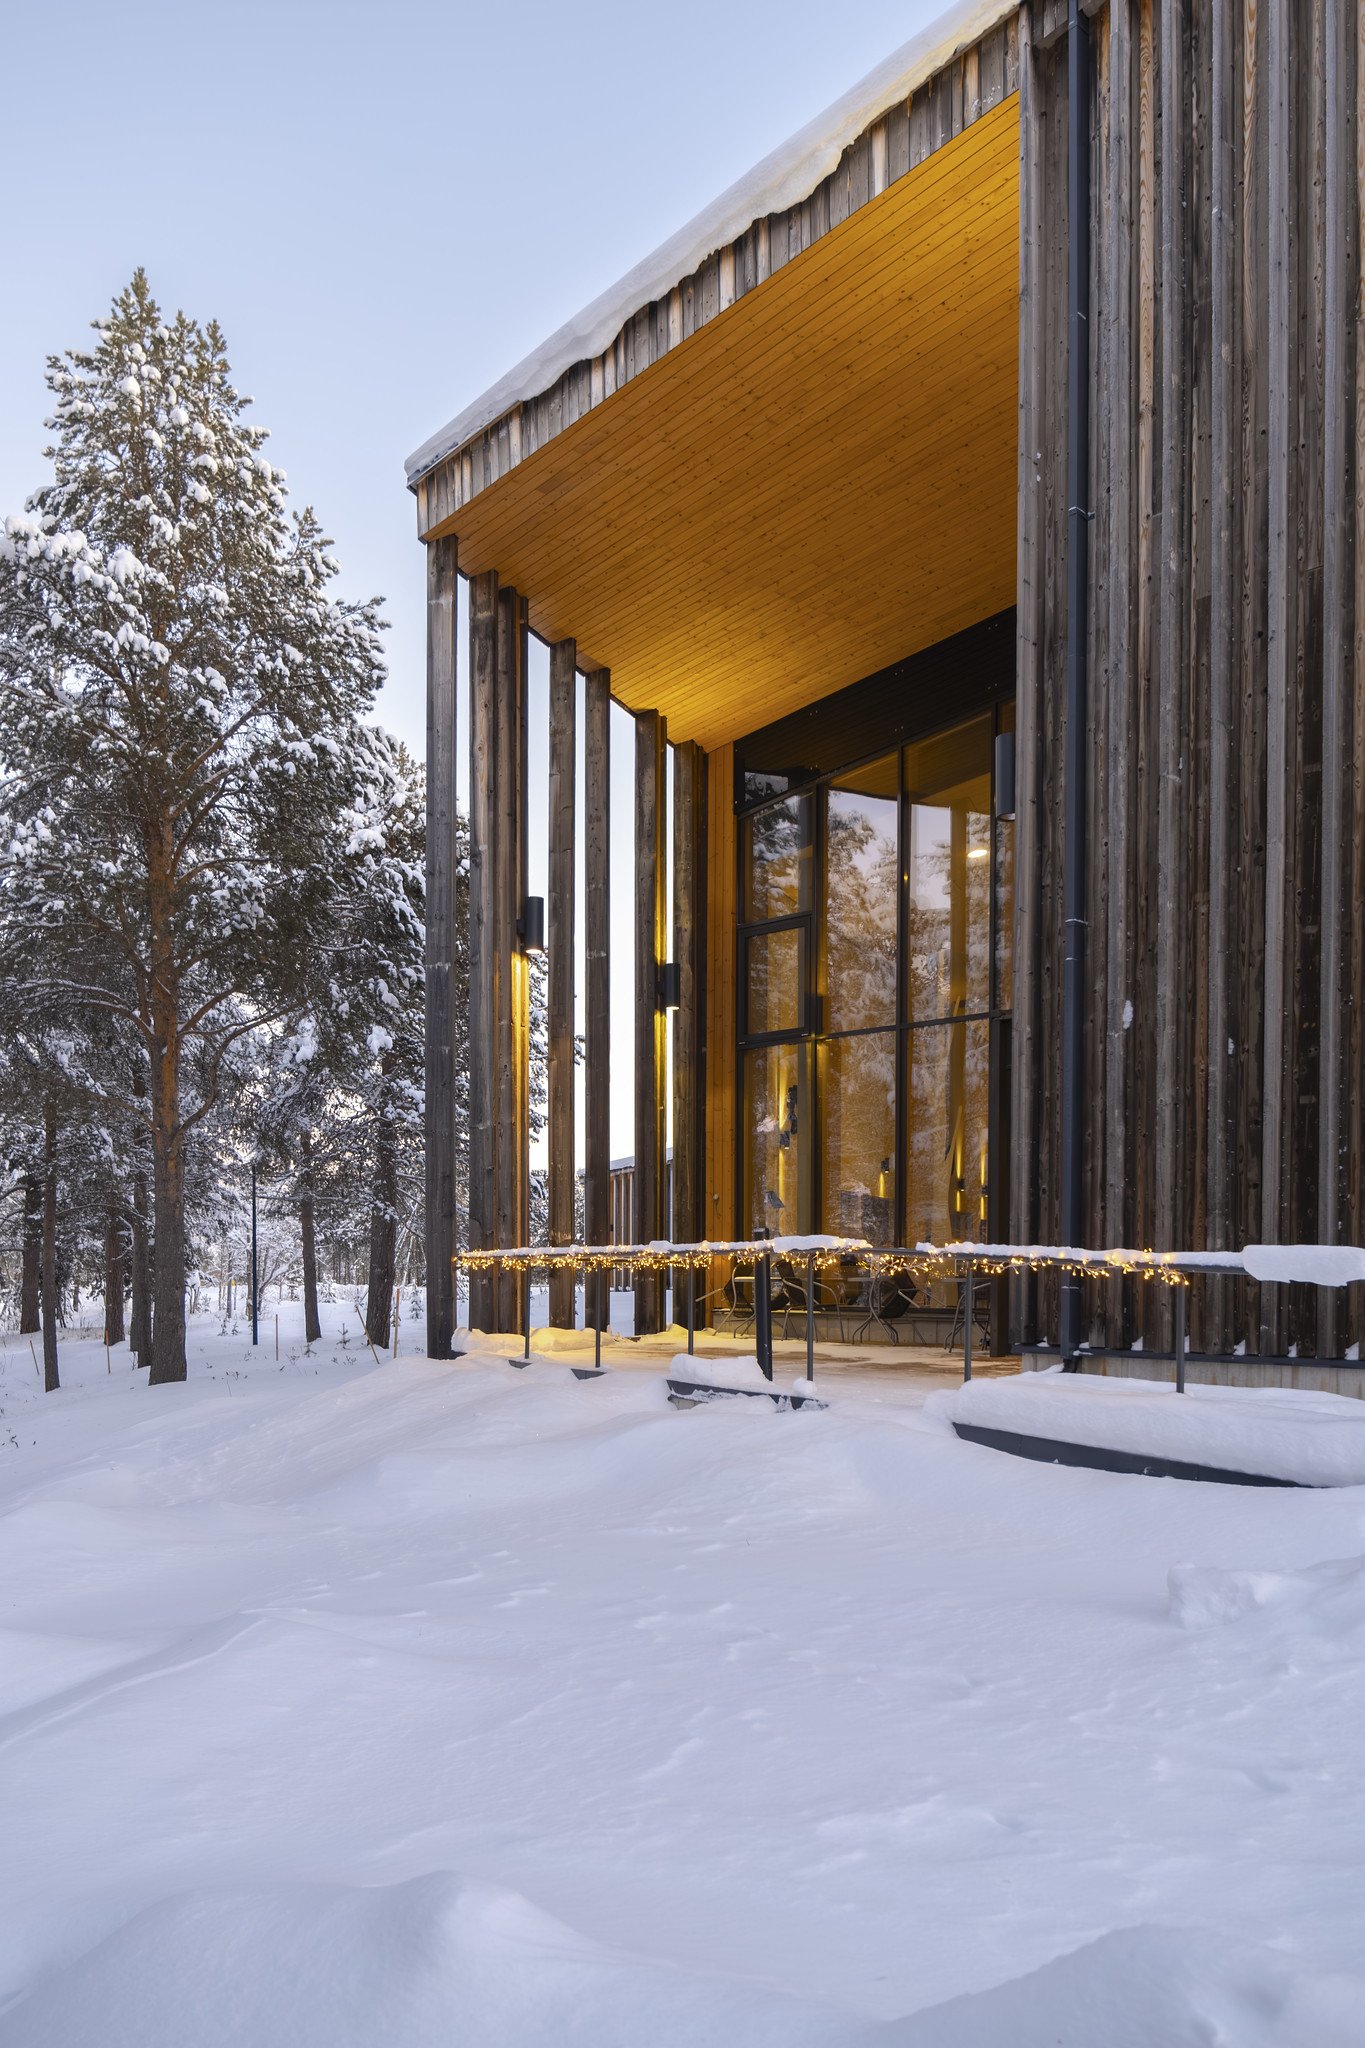 The Sámi Cultural Centre Sajos | Finland by HALO Architects